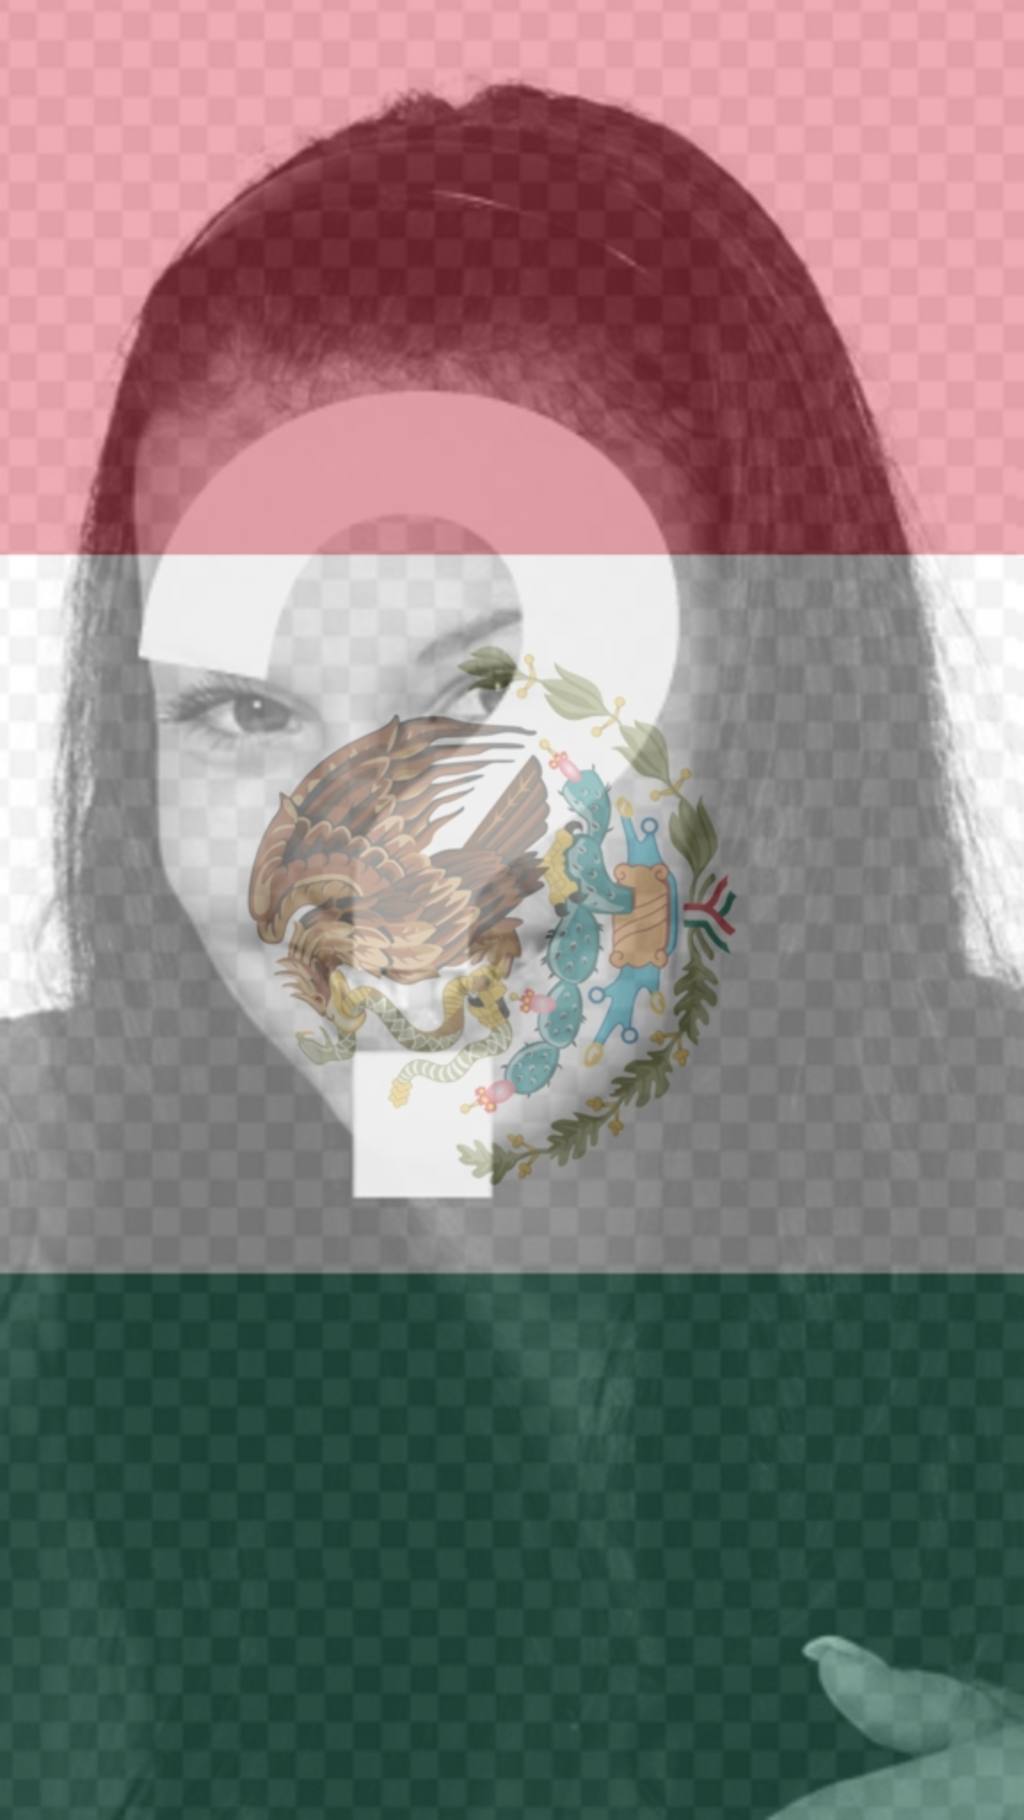 Background for your mobile phone with the flag of Mexico as a filter with your photo ..